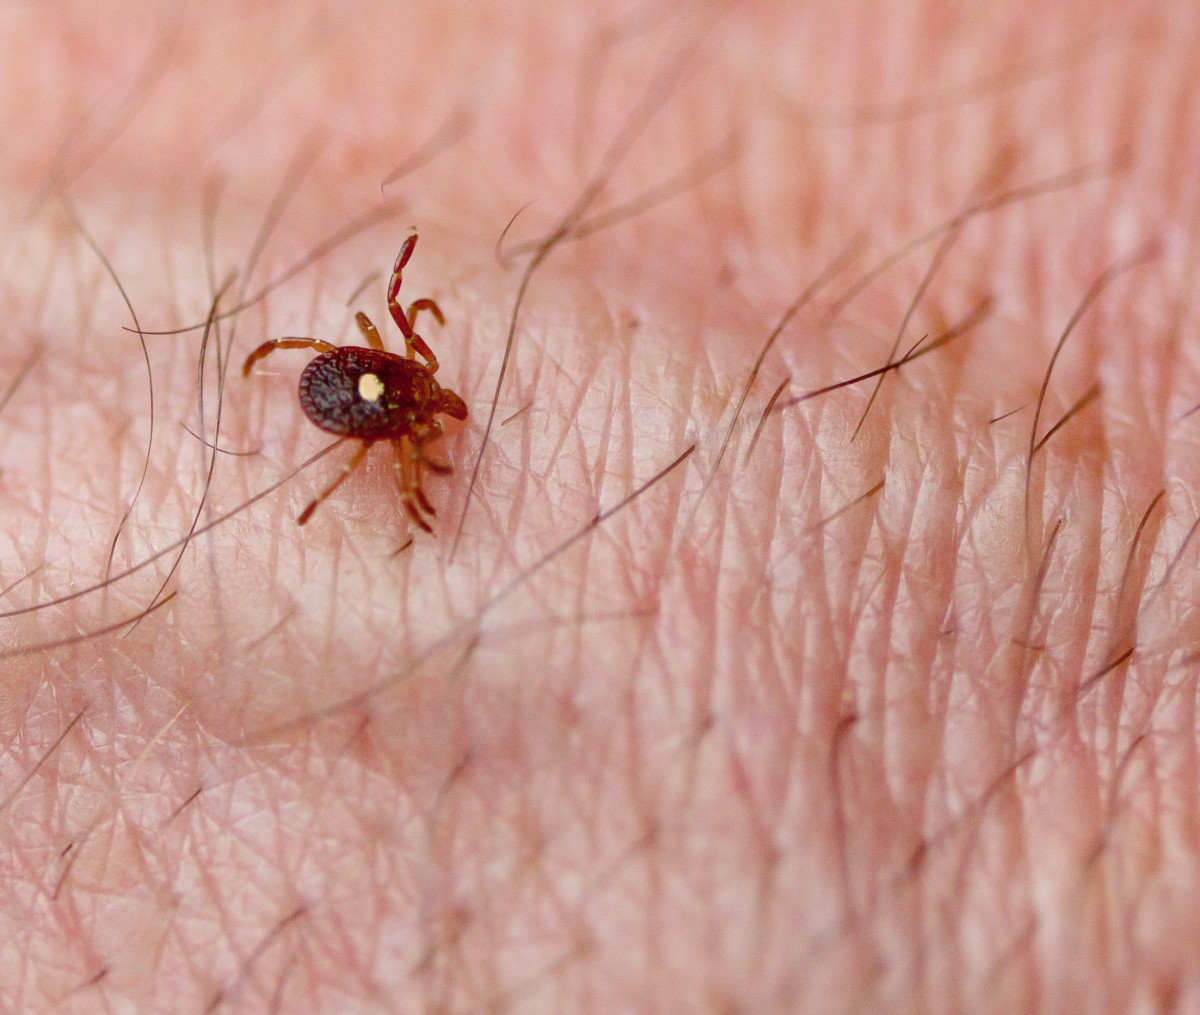 Meat Allergy From Tick Bites on the Rise